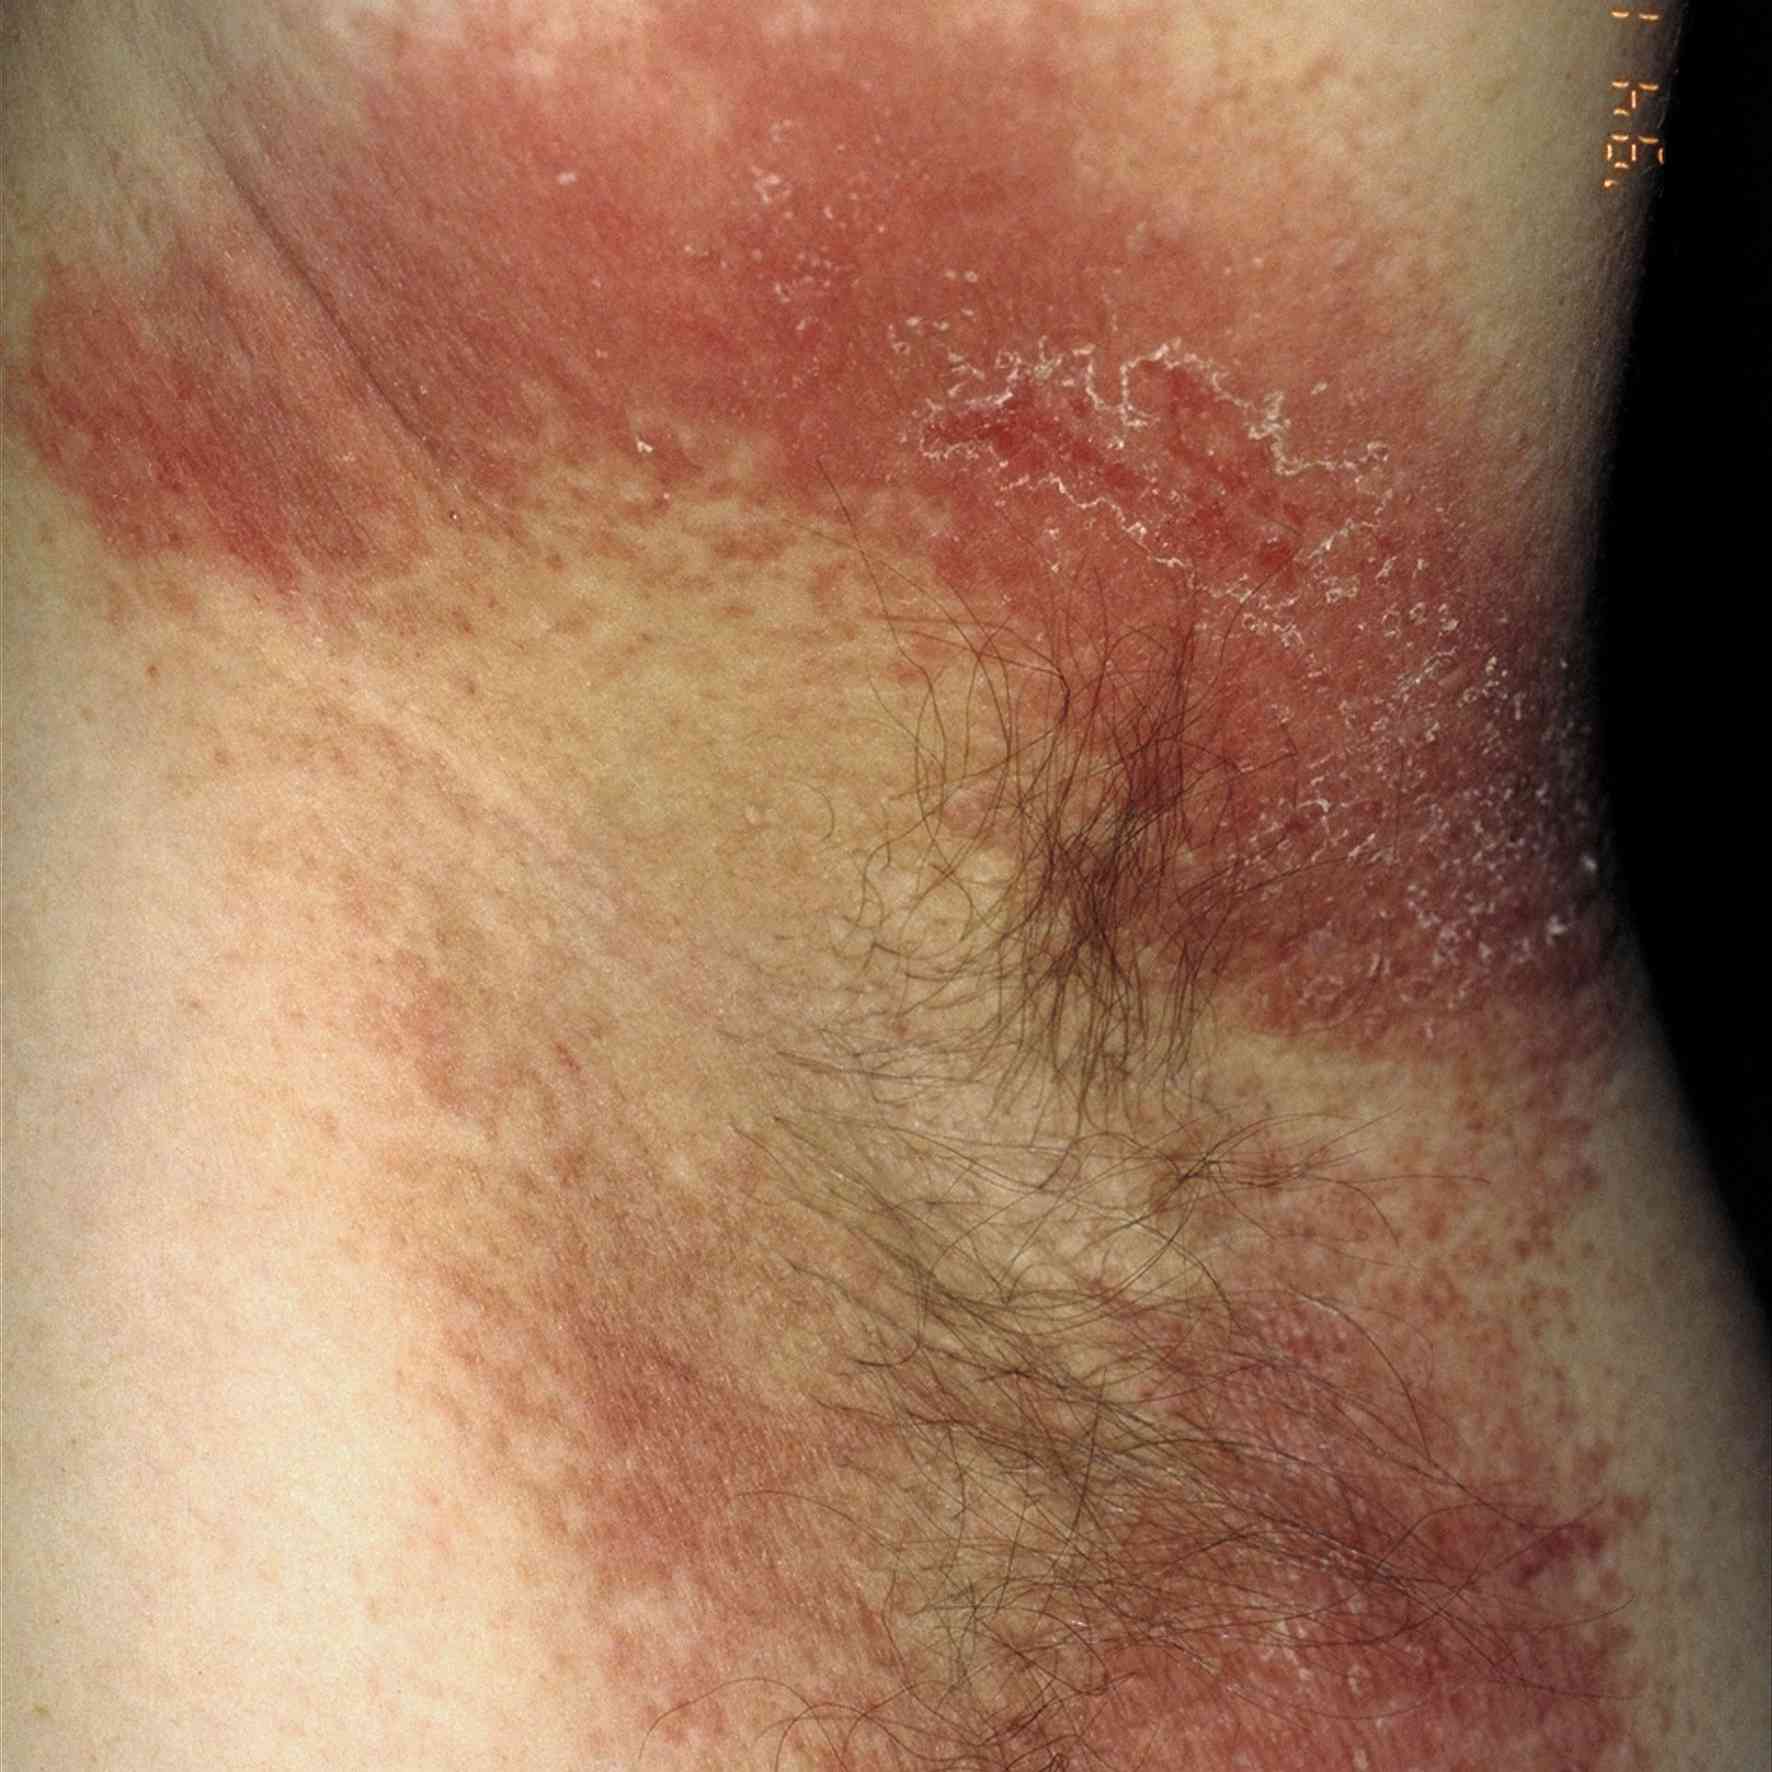 Common Rashes Found in the Armpits